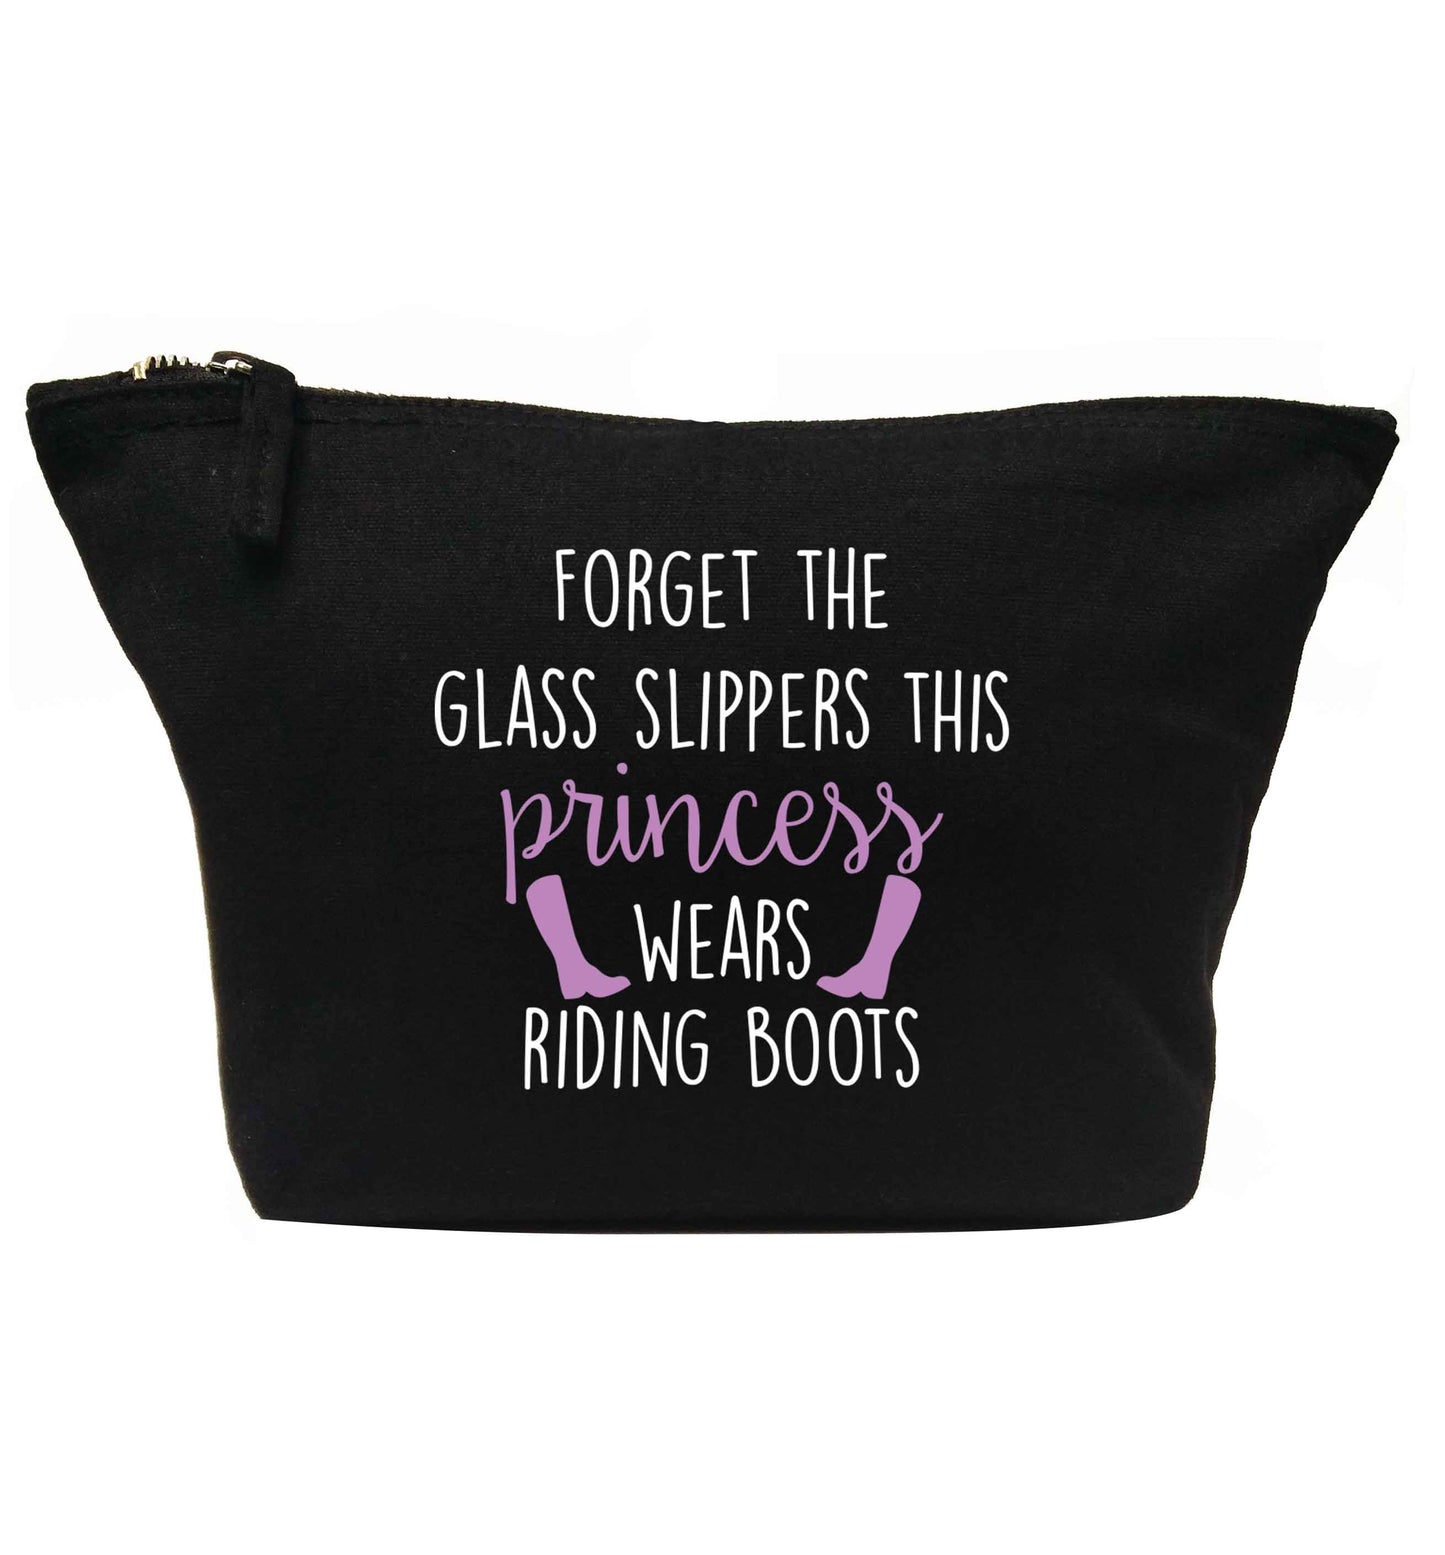 Forget the glass slippers this princess wears riding boots | Makeup / wash bag